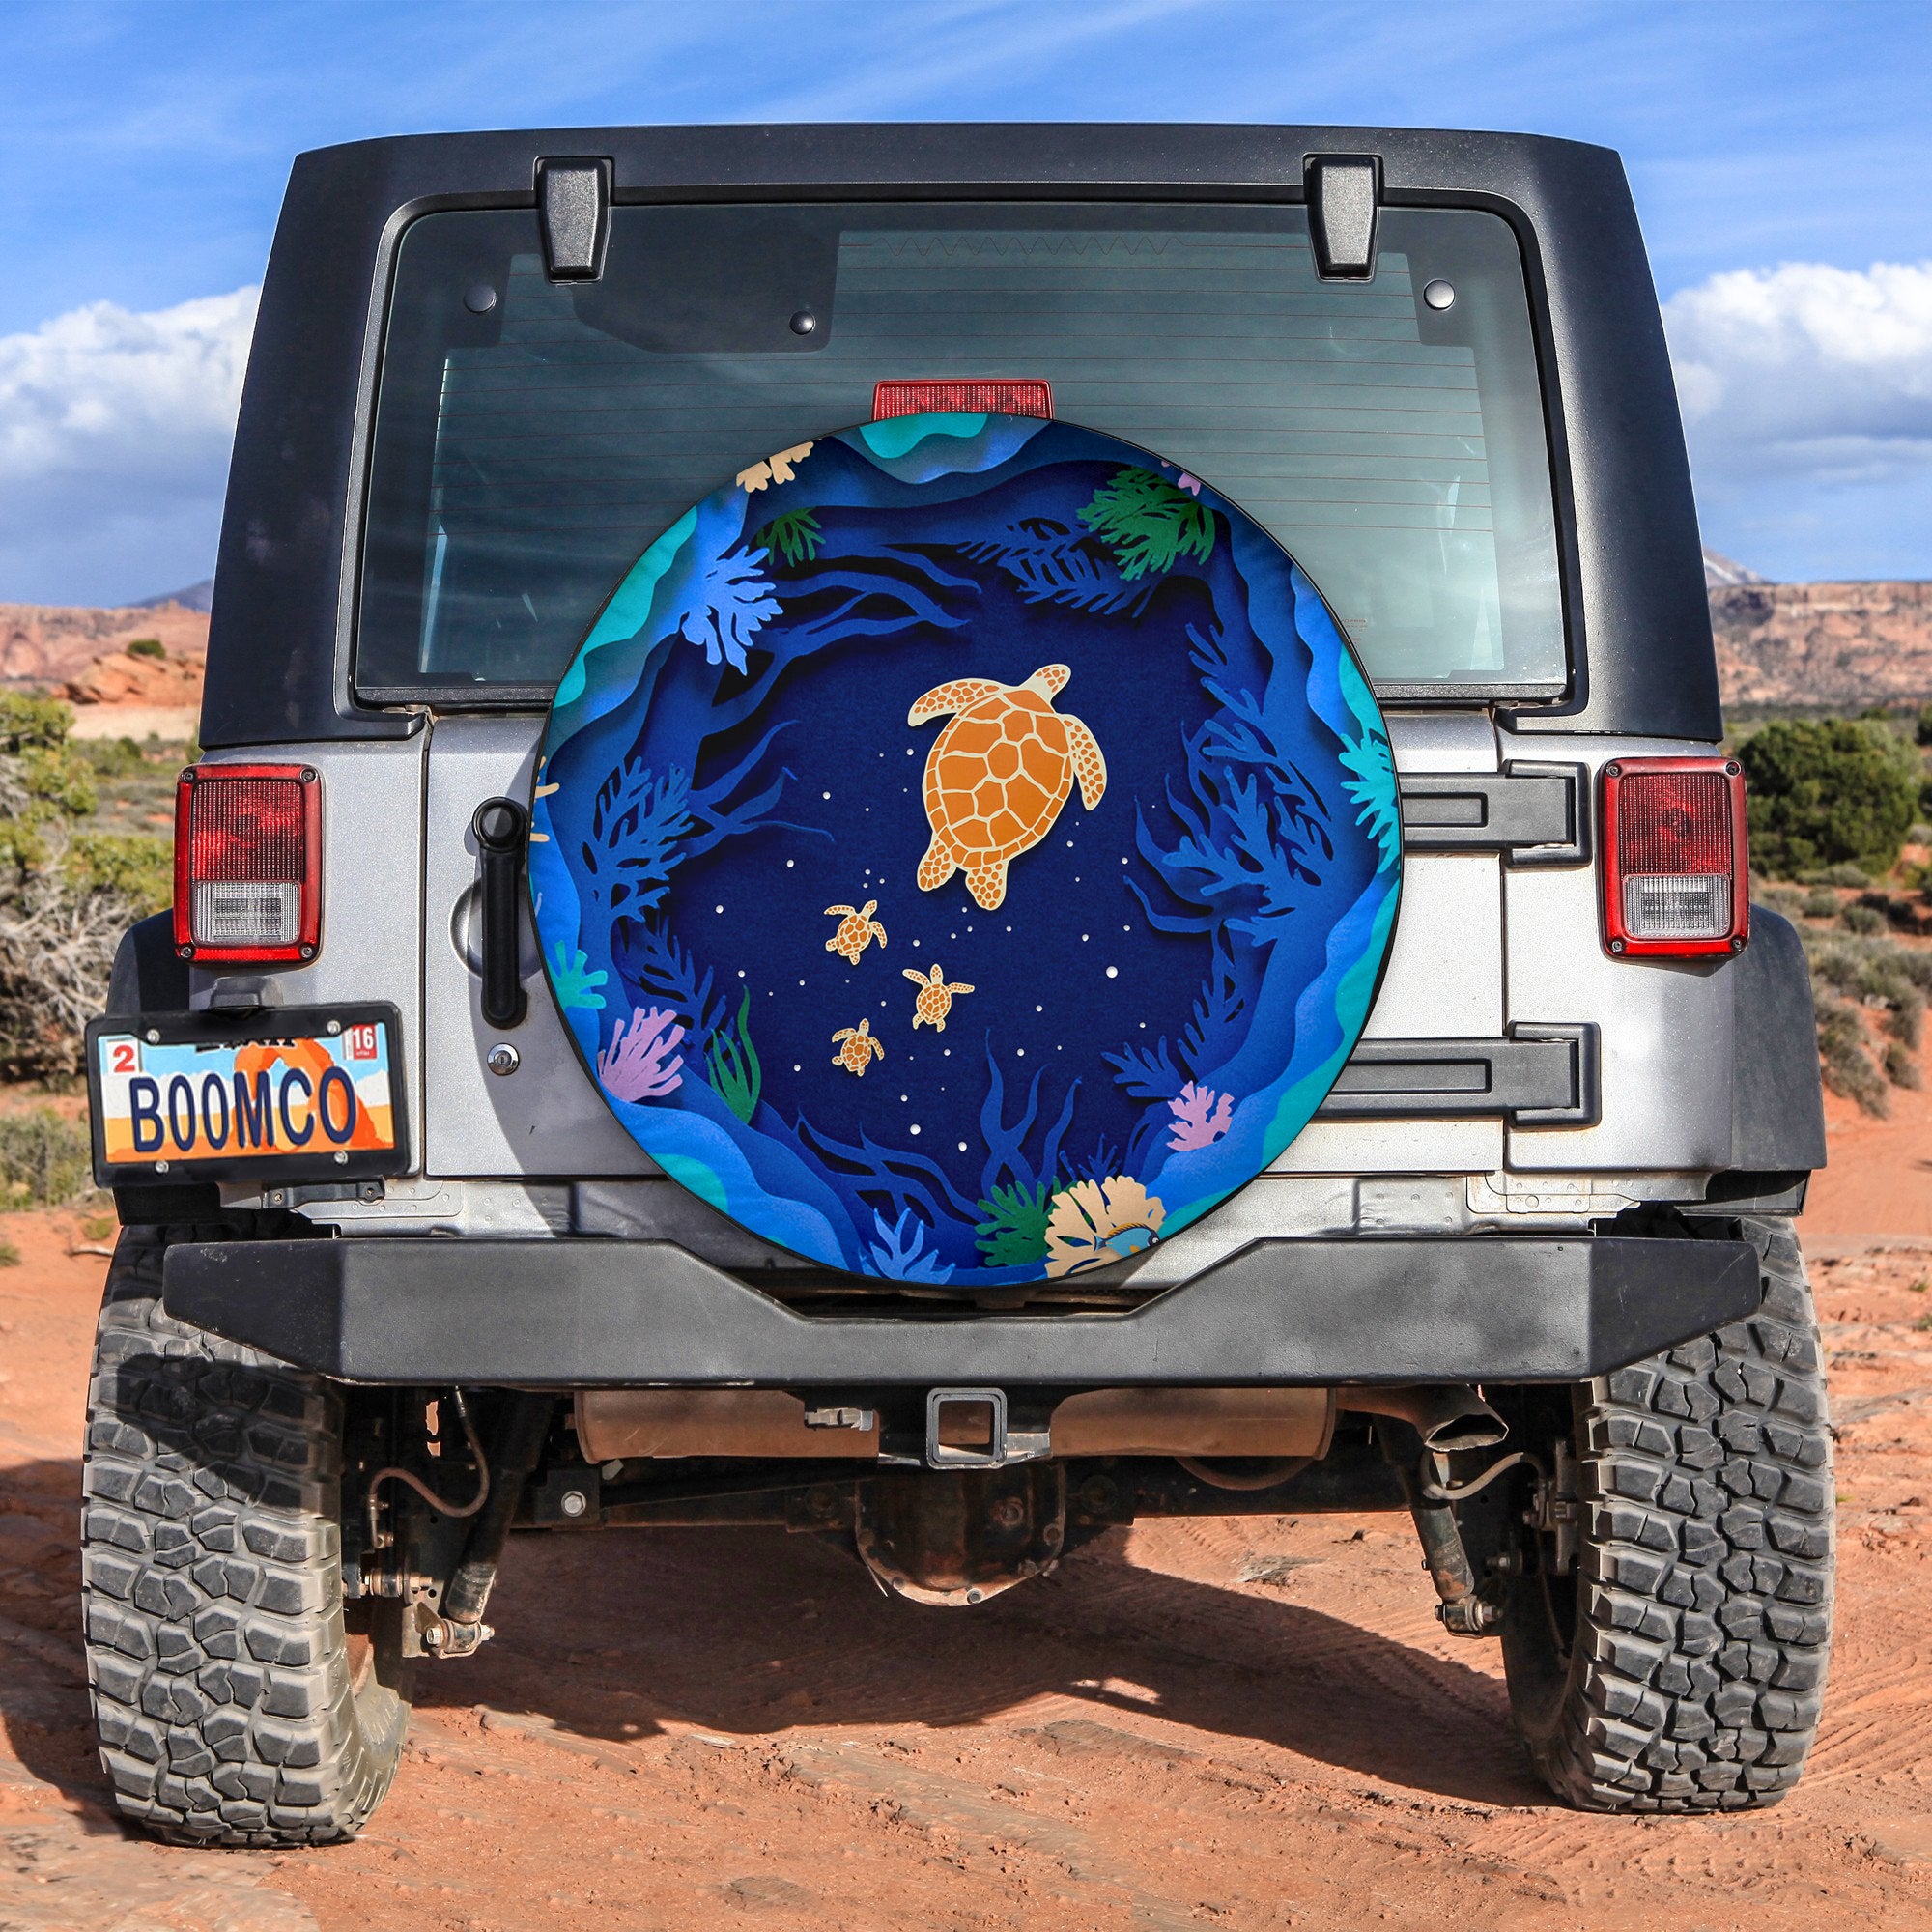 Turtle Deep Ocean Car Spare Tire Covers Gift For Campers Nearkii